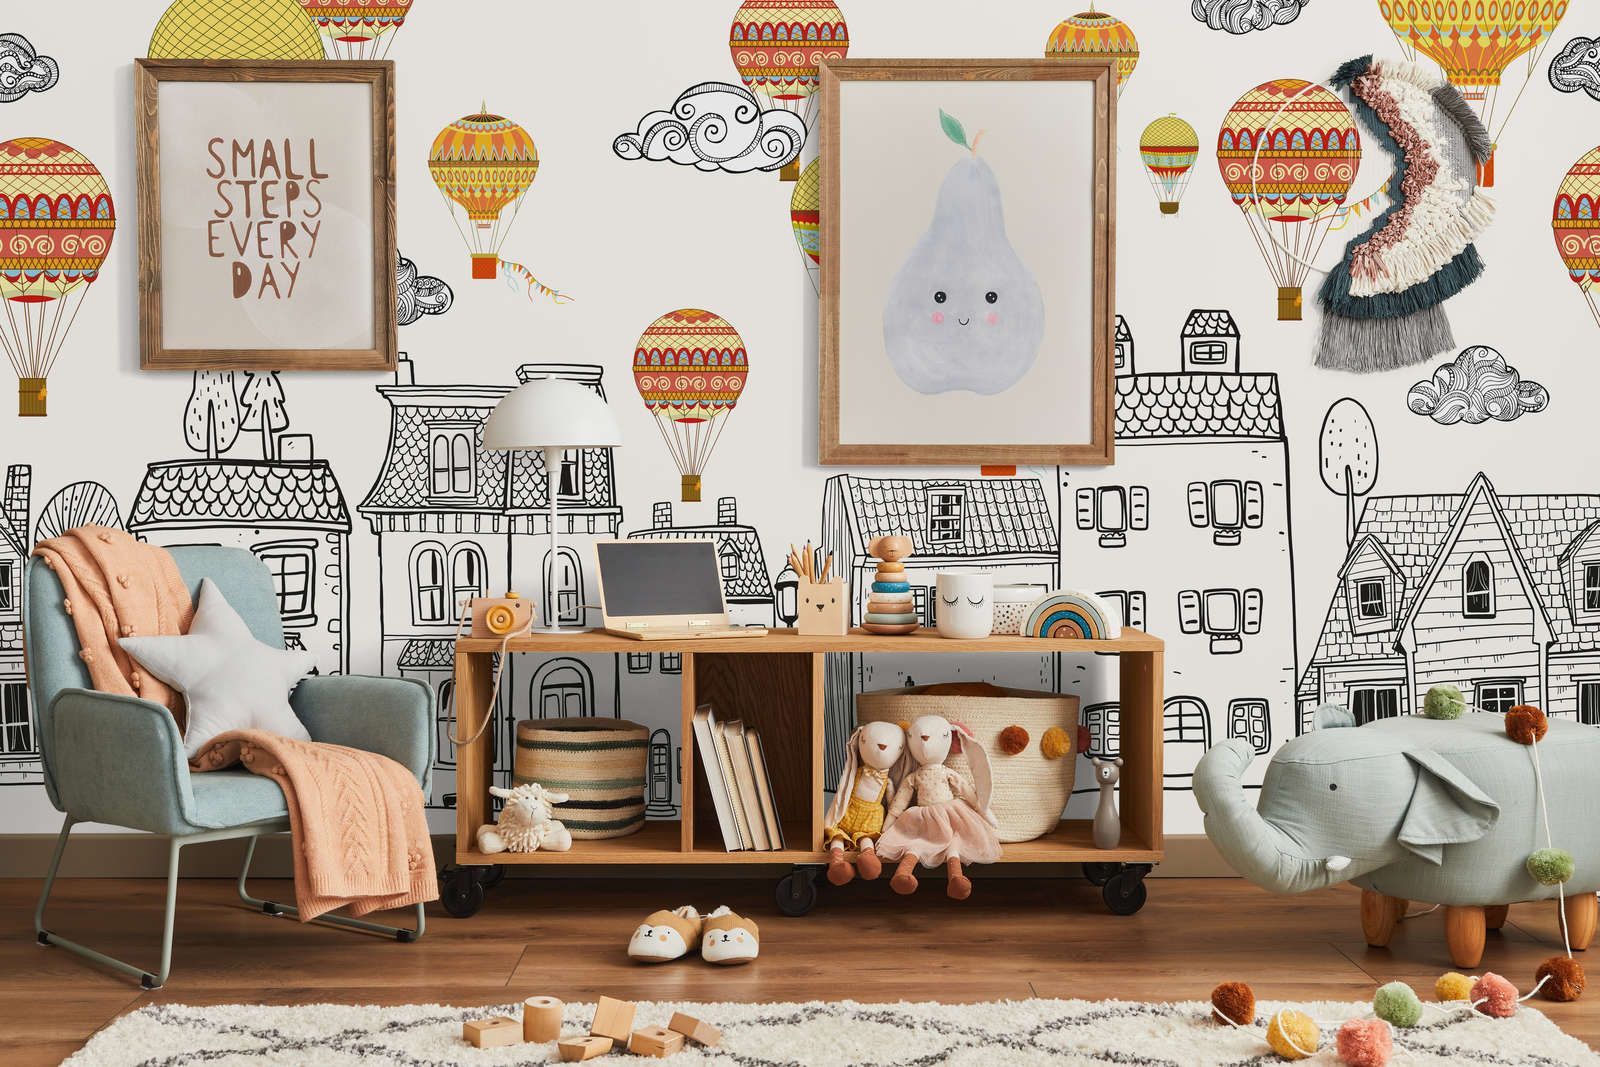             Small Town with Hot Air Balloons Wallpaper - Smooth & Pearlescent Non-woven
        